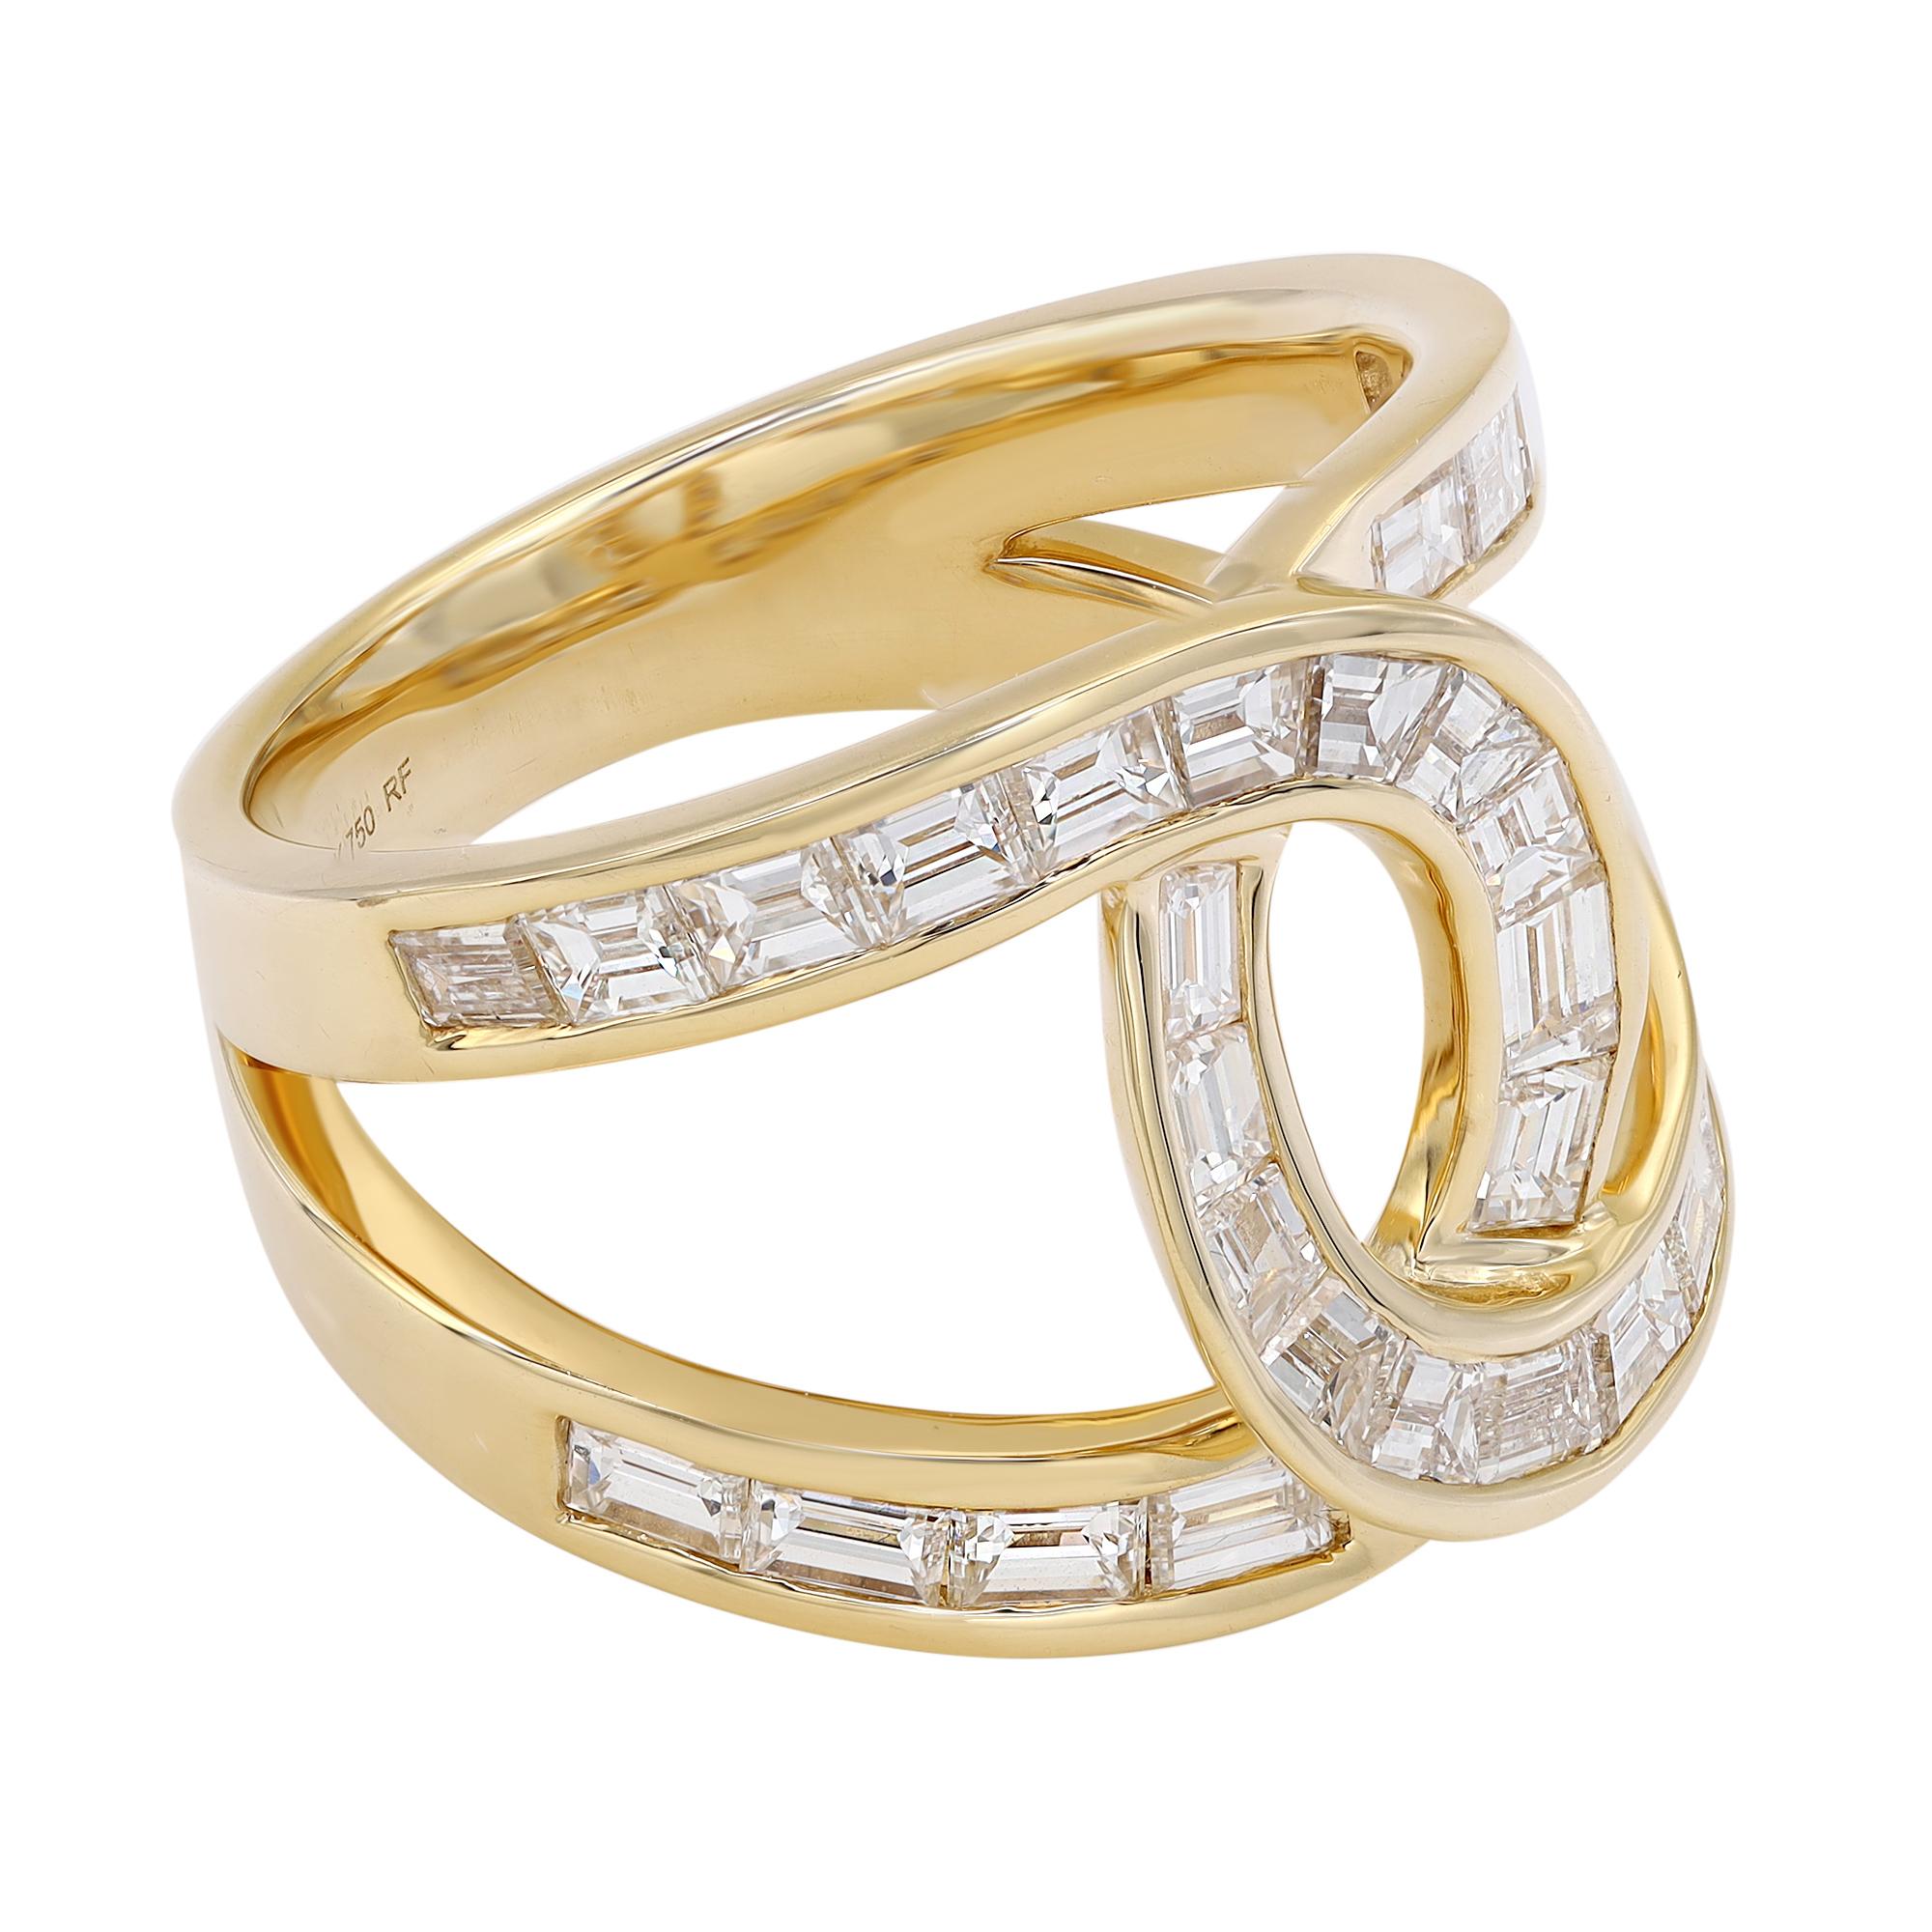 Baguette Cut Diamond Wide Statement Ring 18K Yellow Gold 3.17Cttw In New Condition For Sale In New York, NY